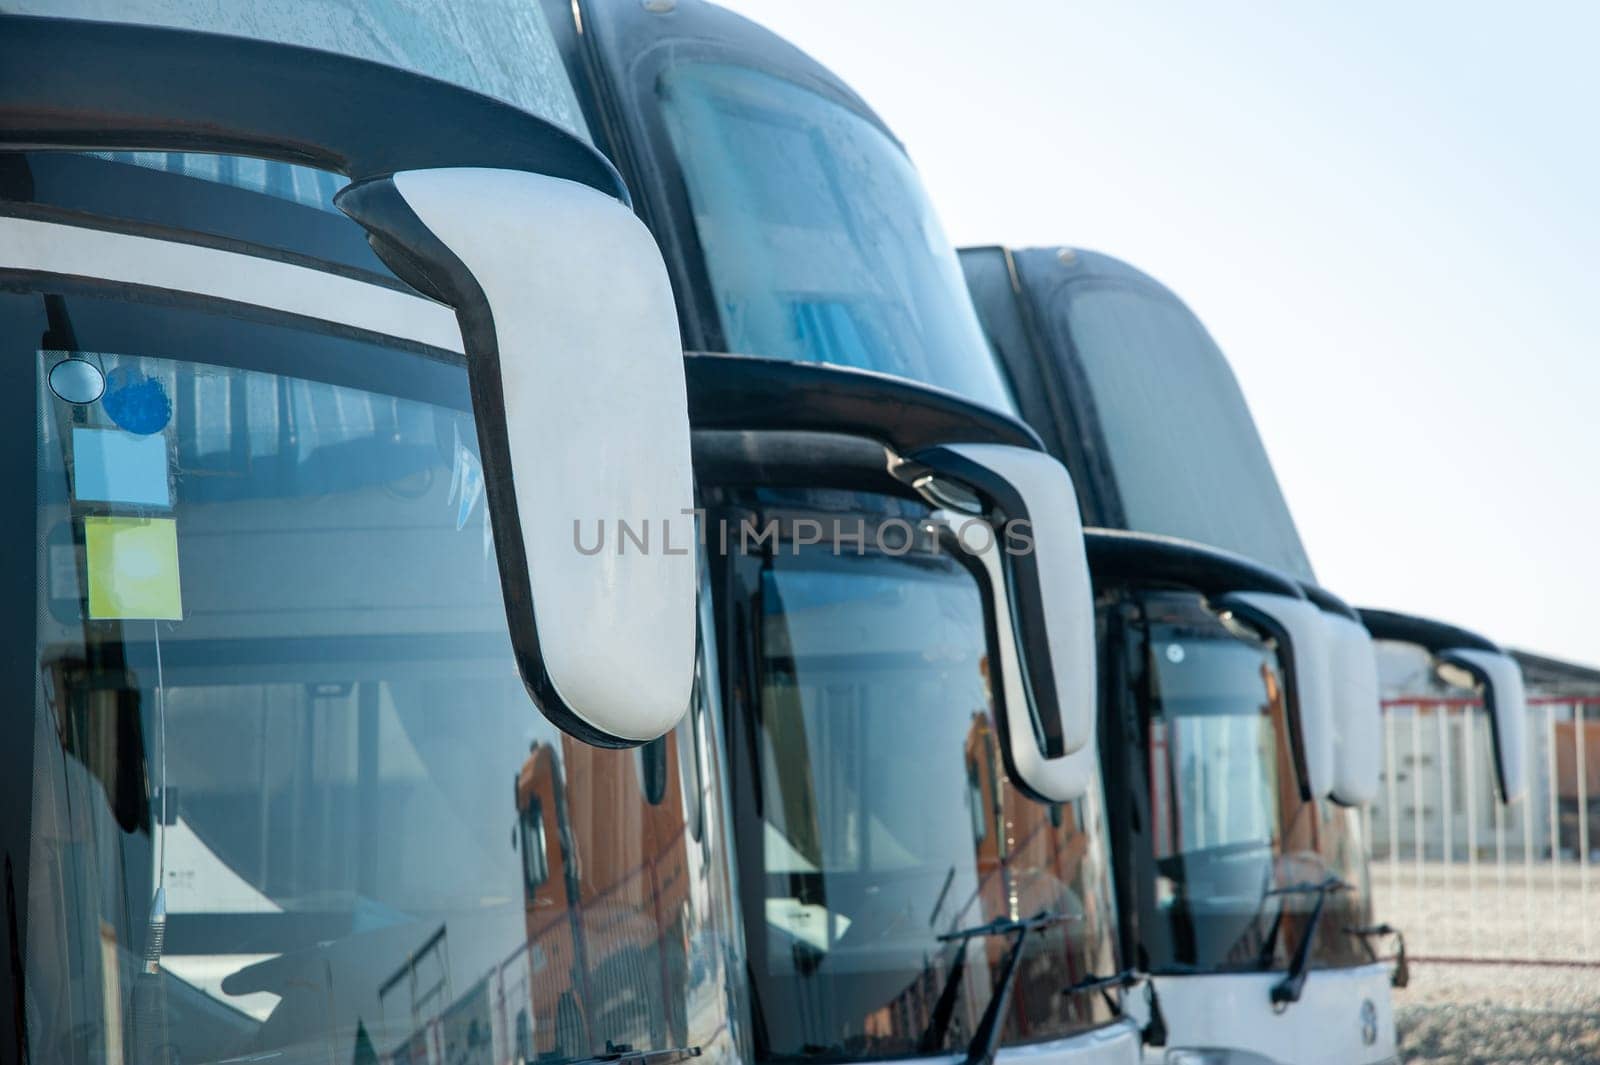 A passenger shift buses stand in a row on a construction site. Windshields